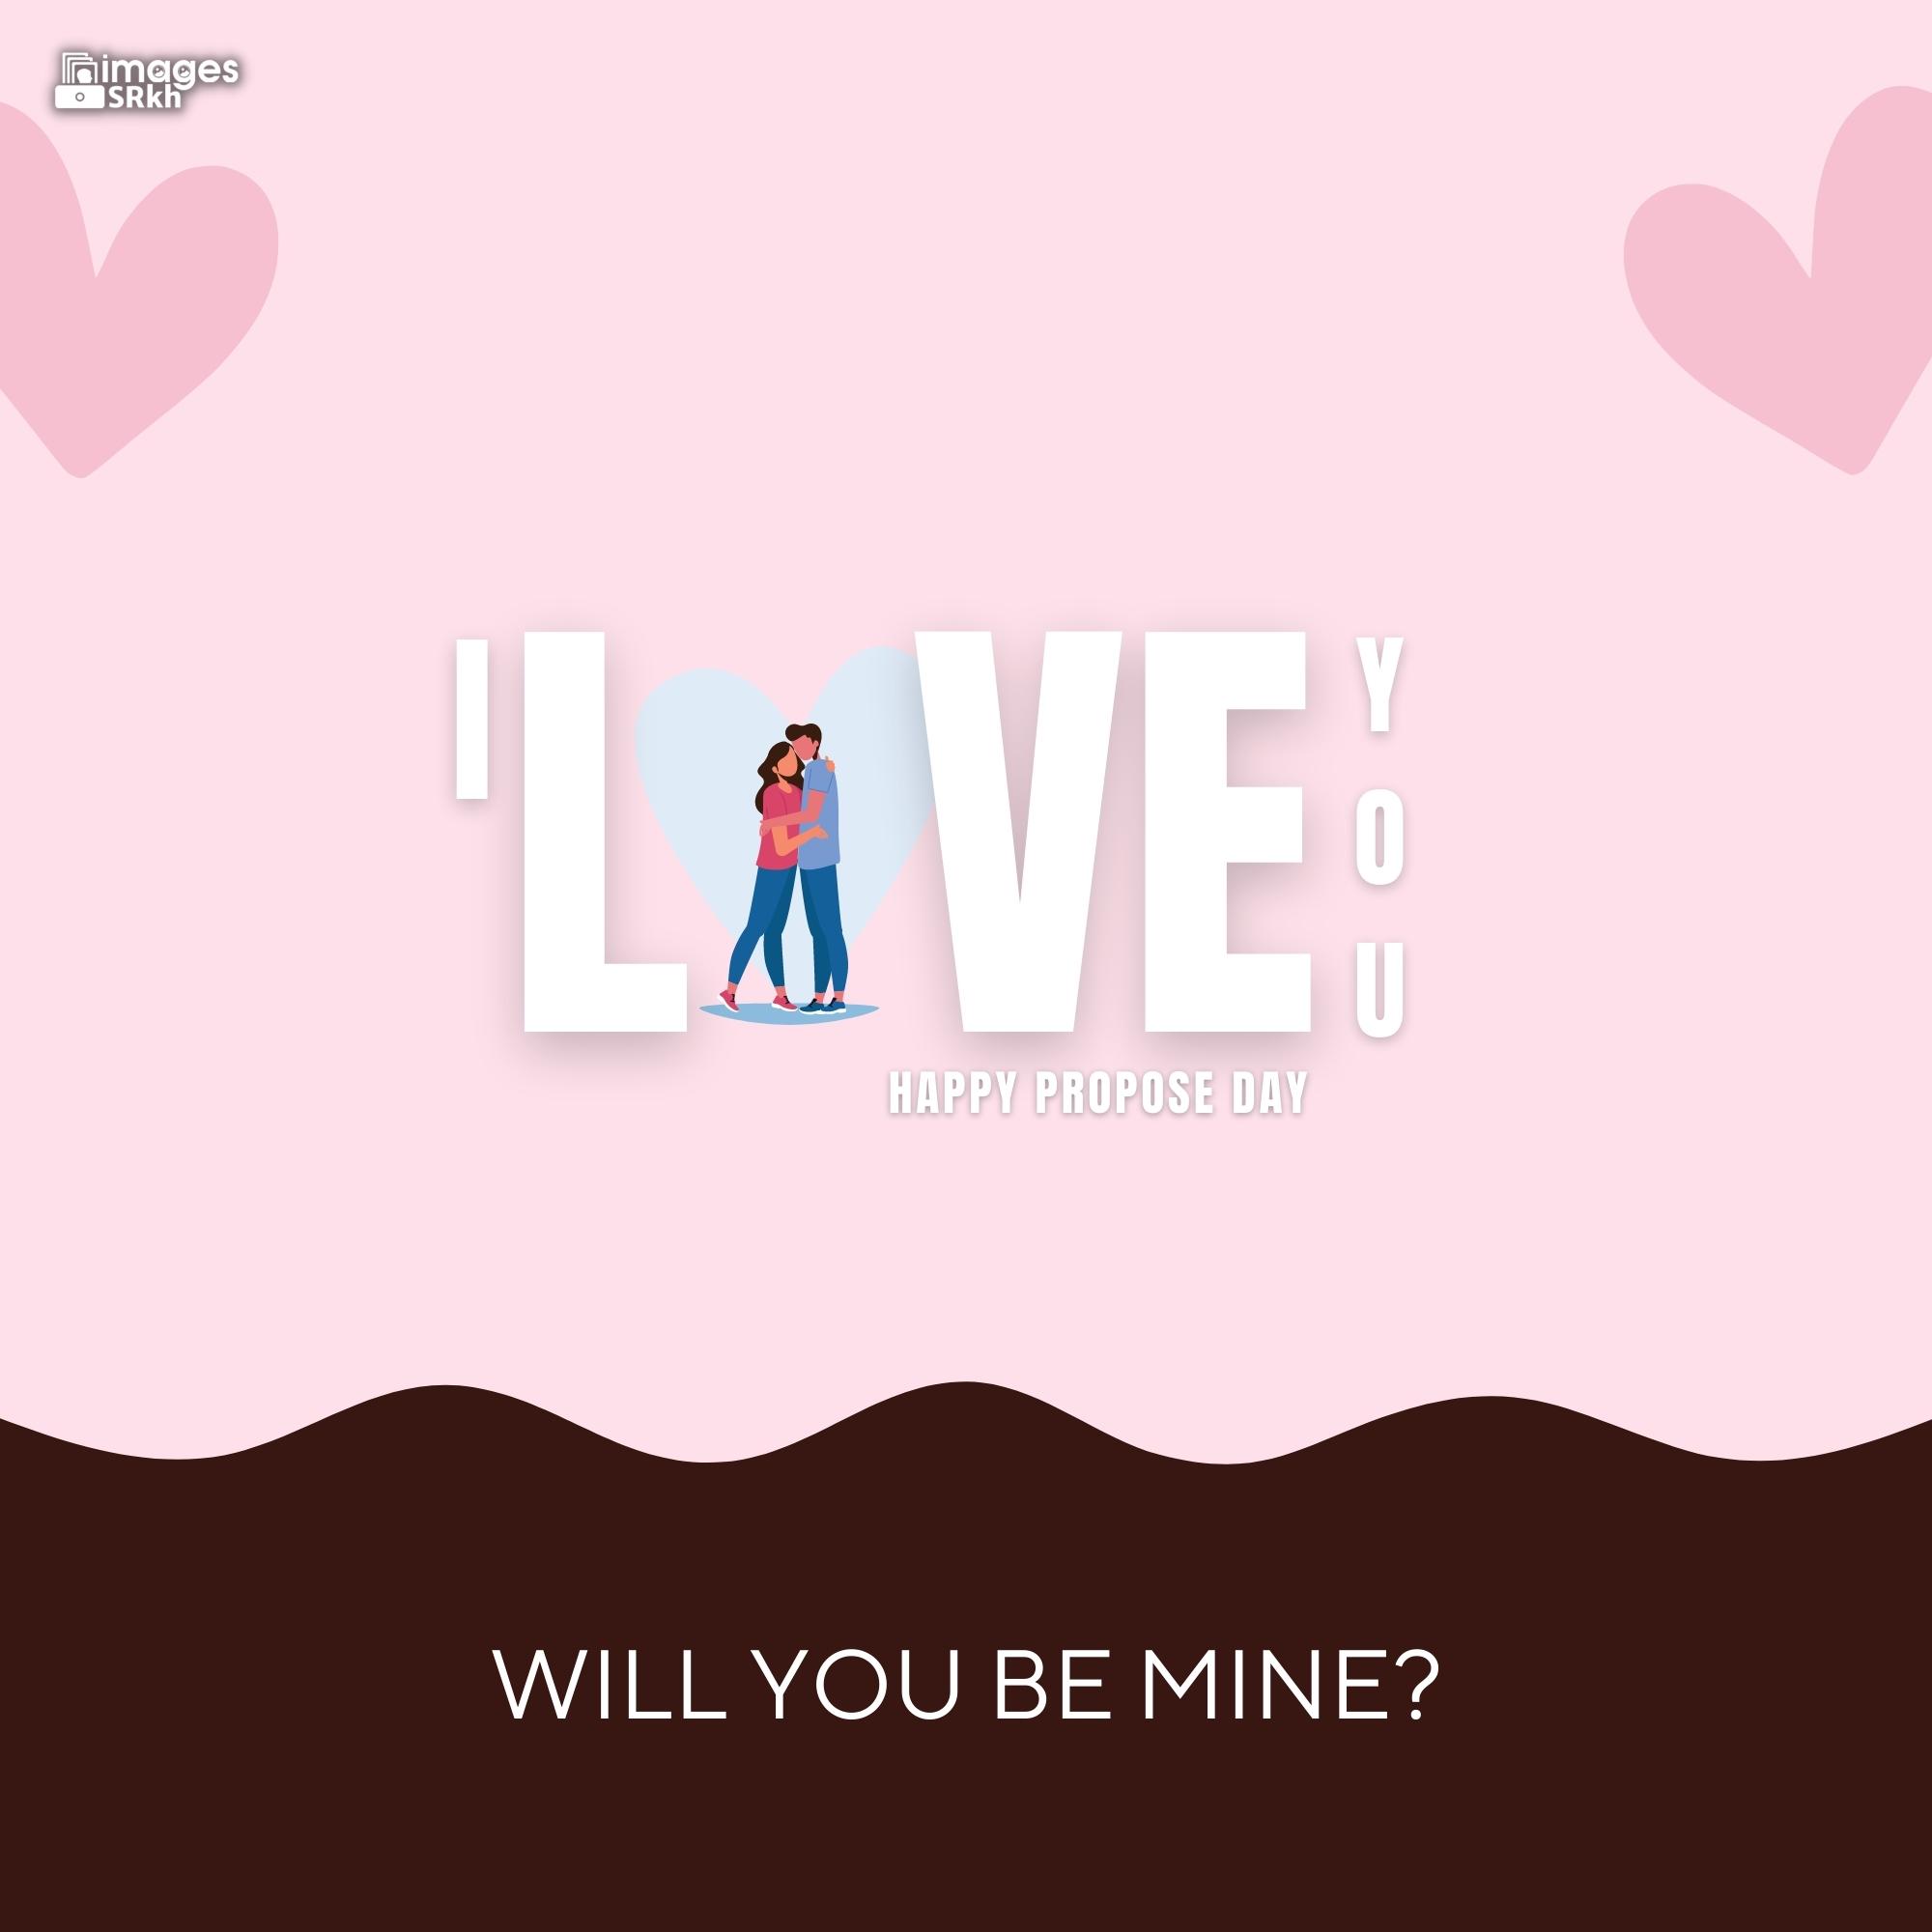 Happy Propose Day Images | 456 | I love you will you be mine